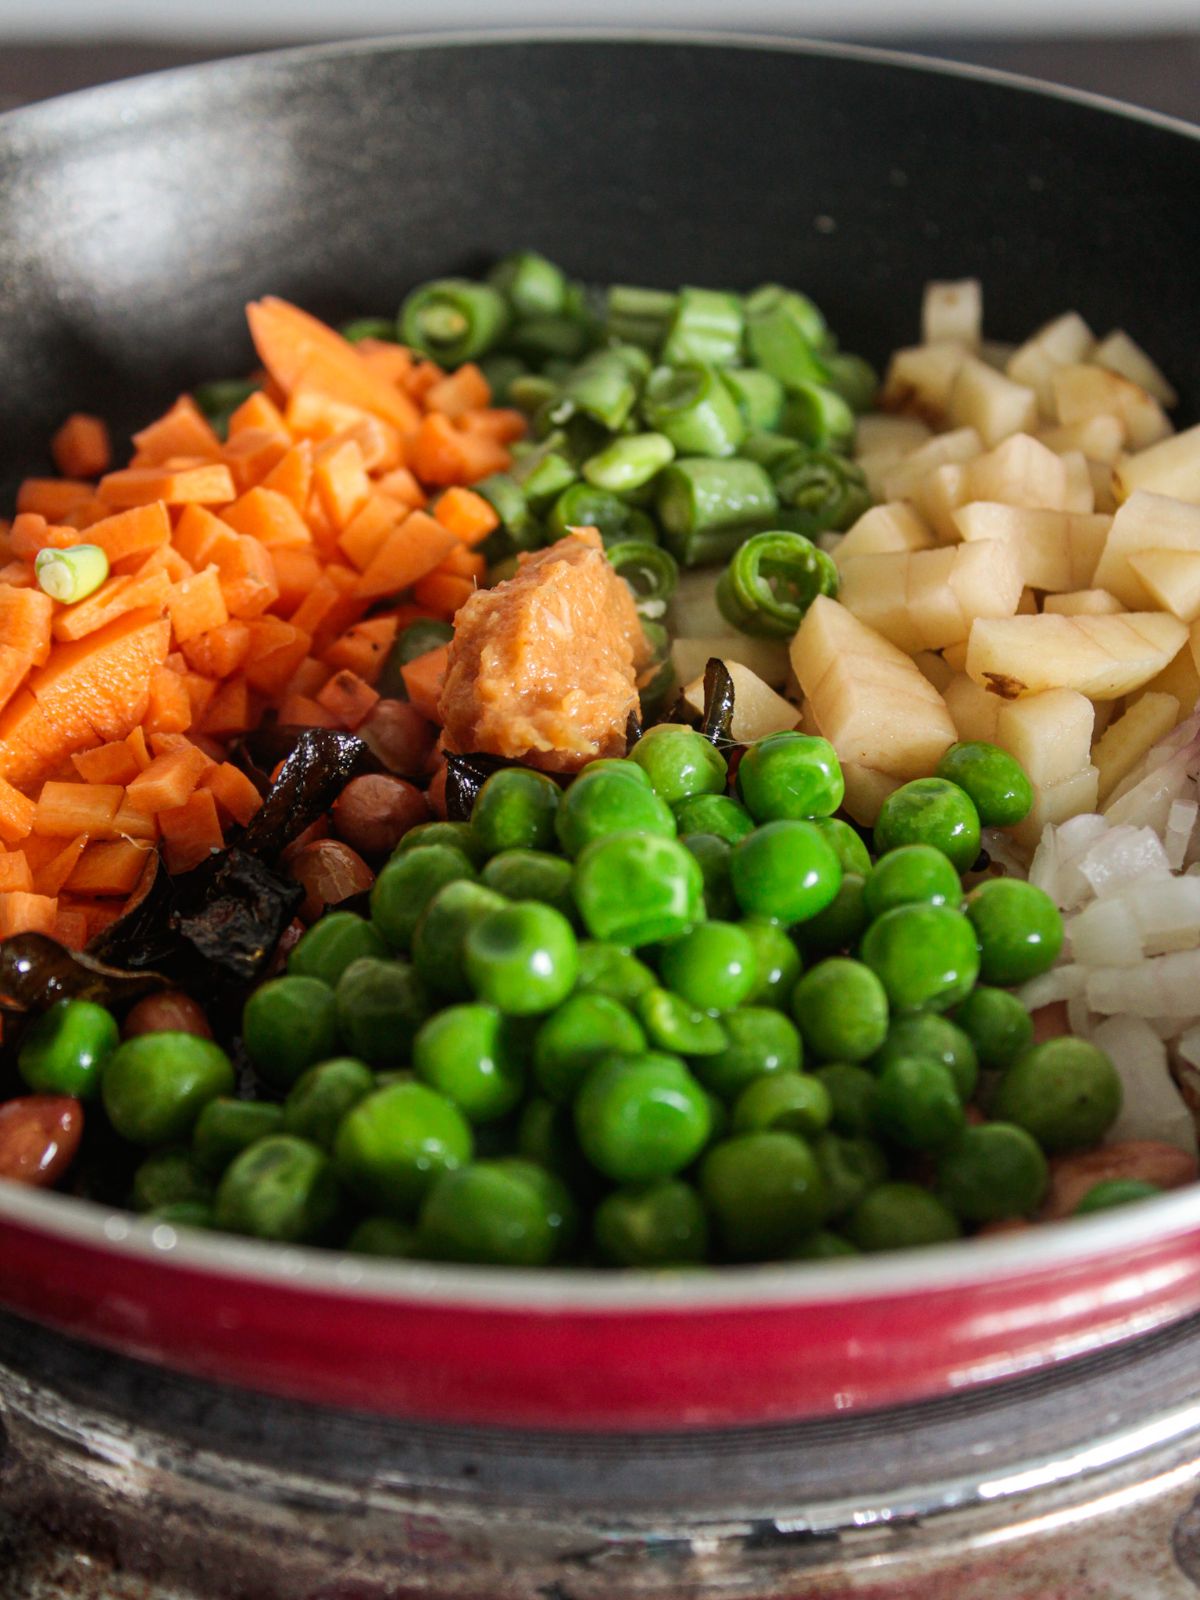 carrots peas and potatoes in red skillet